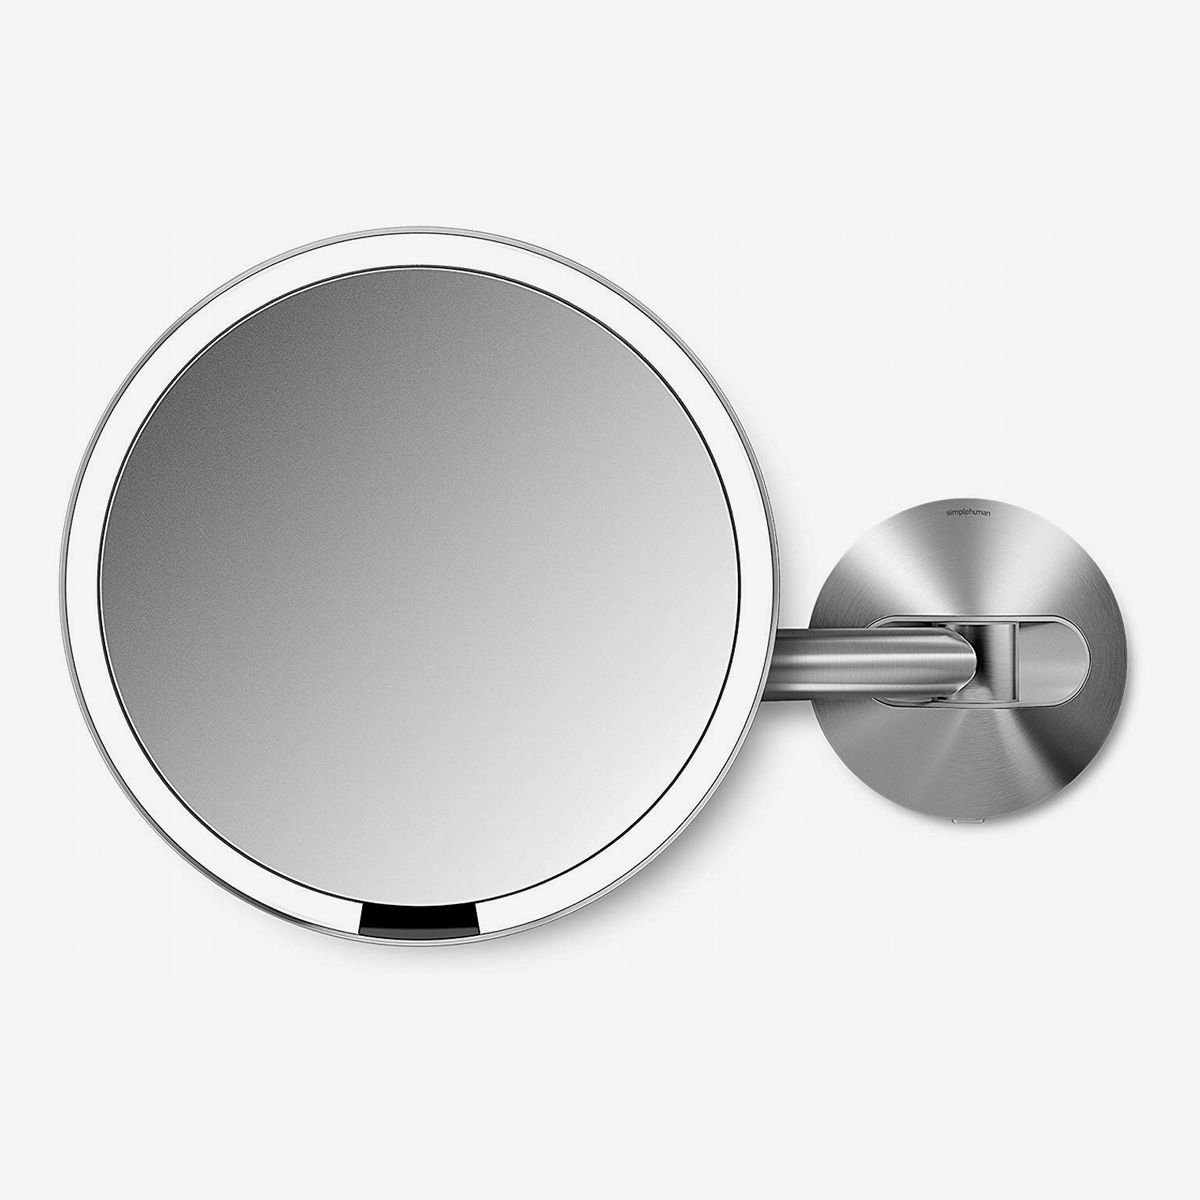 14 Best Lighted Makeup Mirrors 2021, Best Led Makeup Mirror 2021